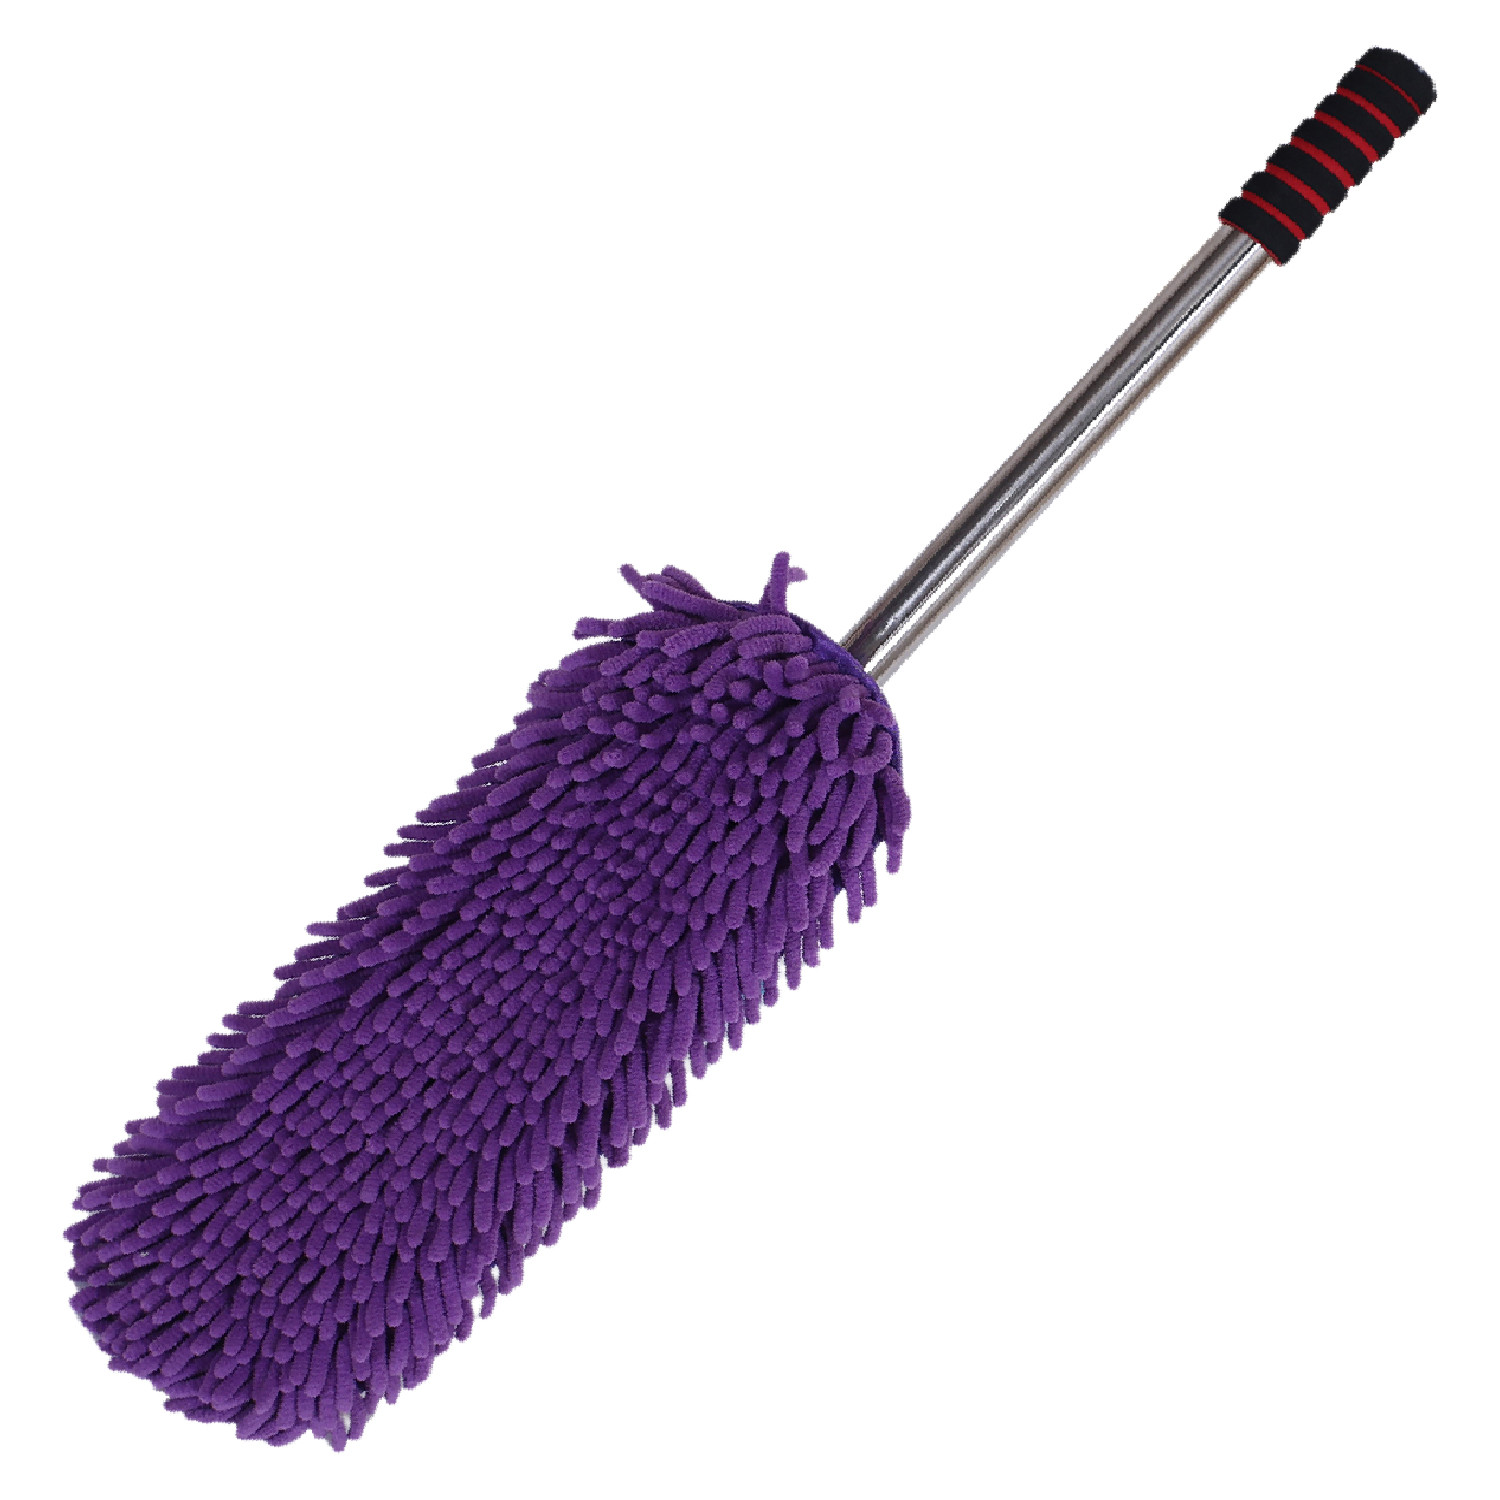 Kuber Industries Microfiber Washable Hand Duster|Stainless Steel Detachable Handle with Cleaning Brush For Car, House Clean (Purple)